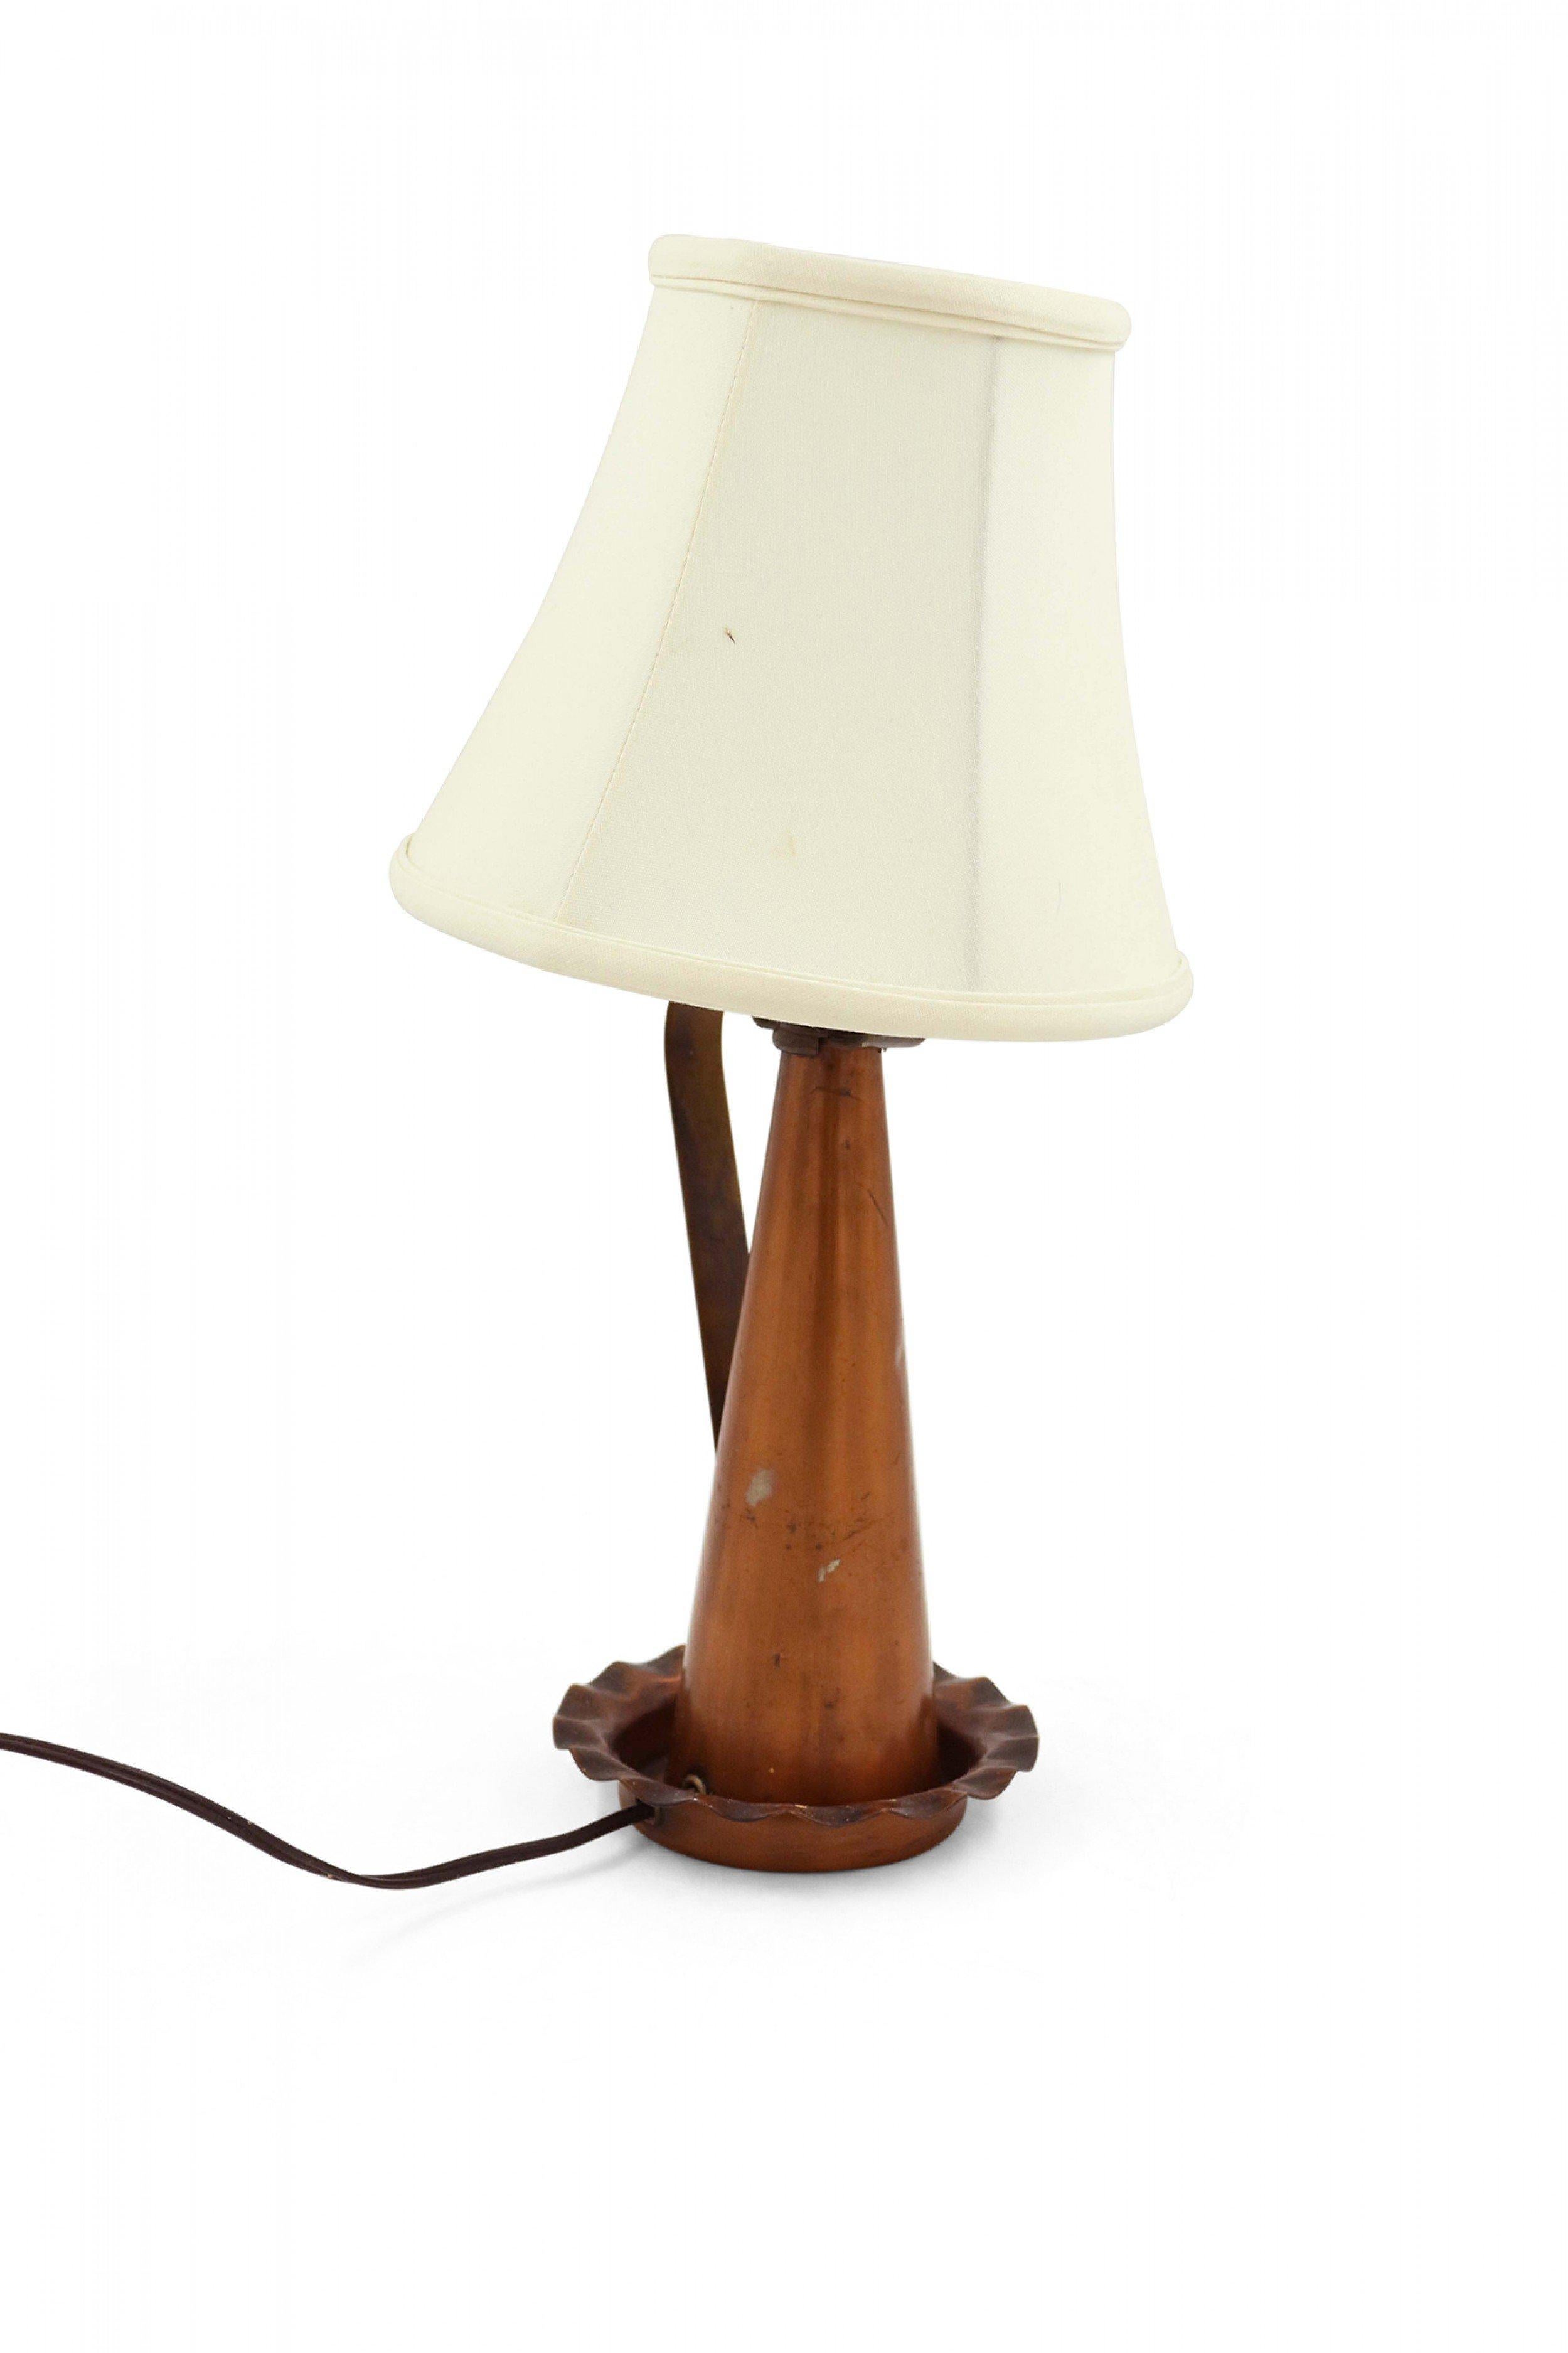 American Country style copper funnel table lamp with scalloped base and brass handle.
 